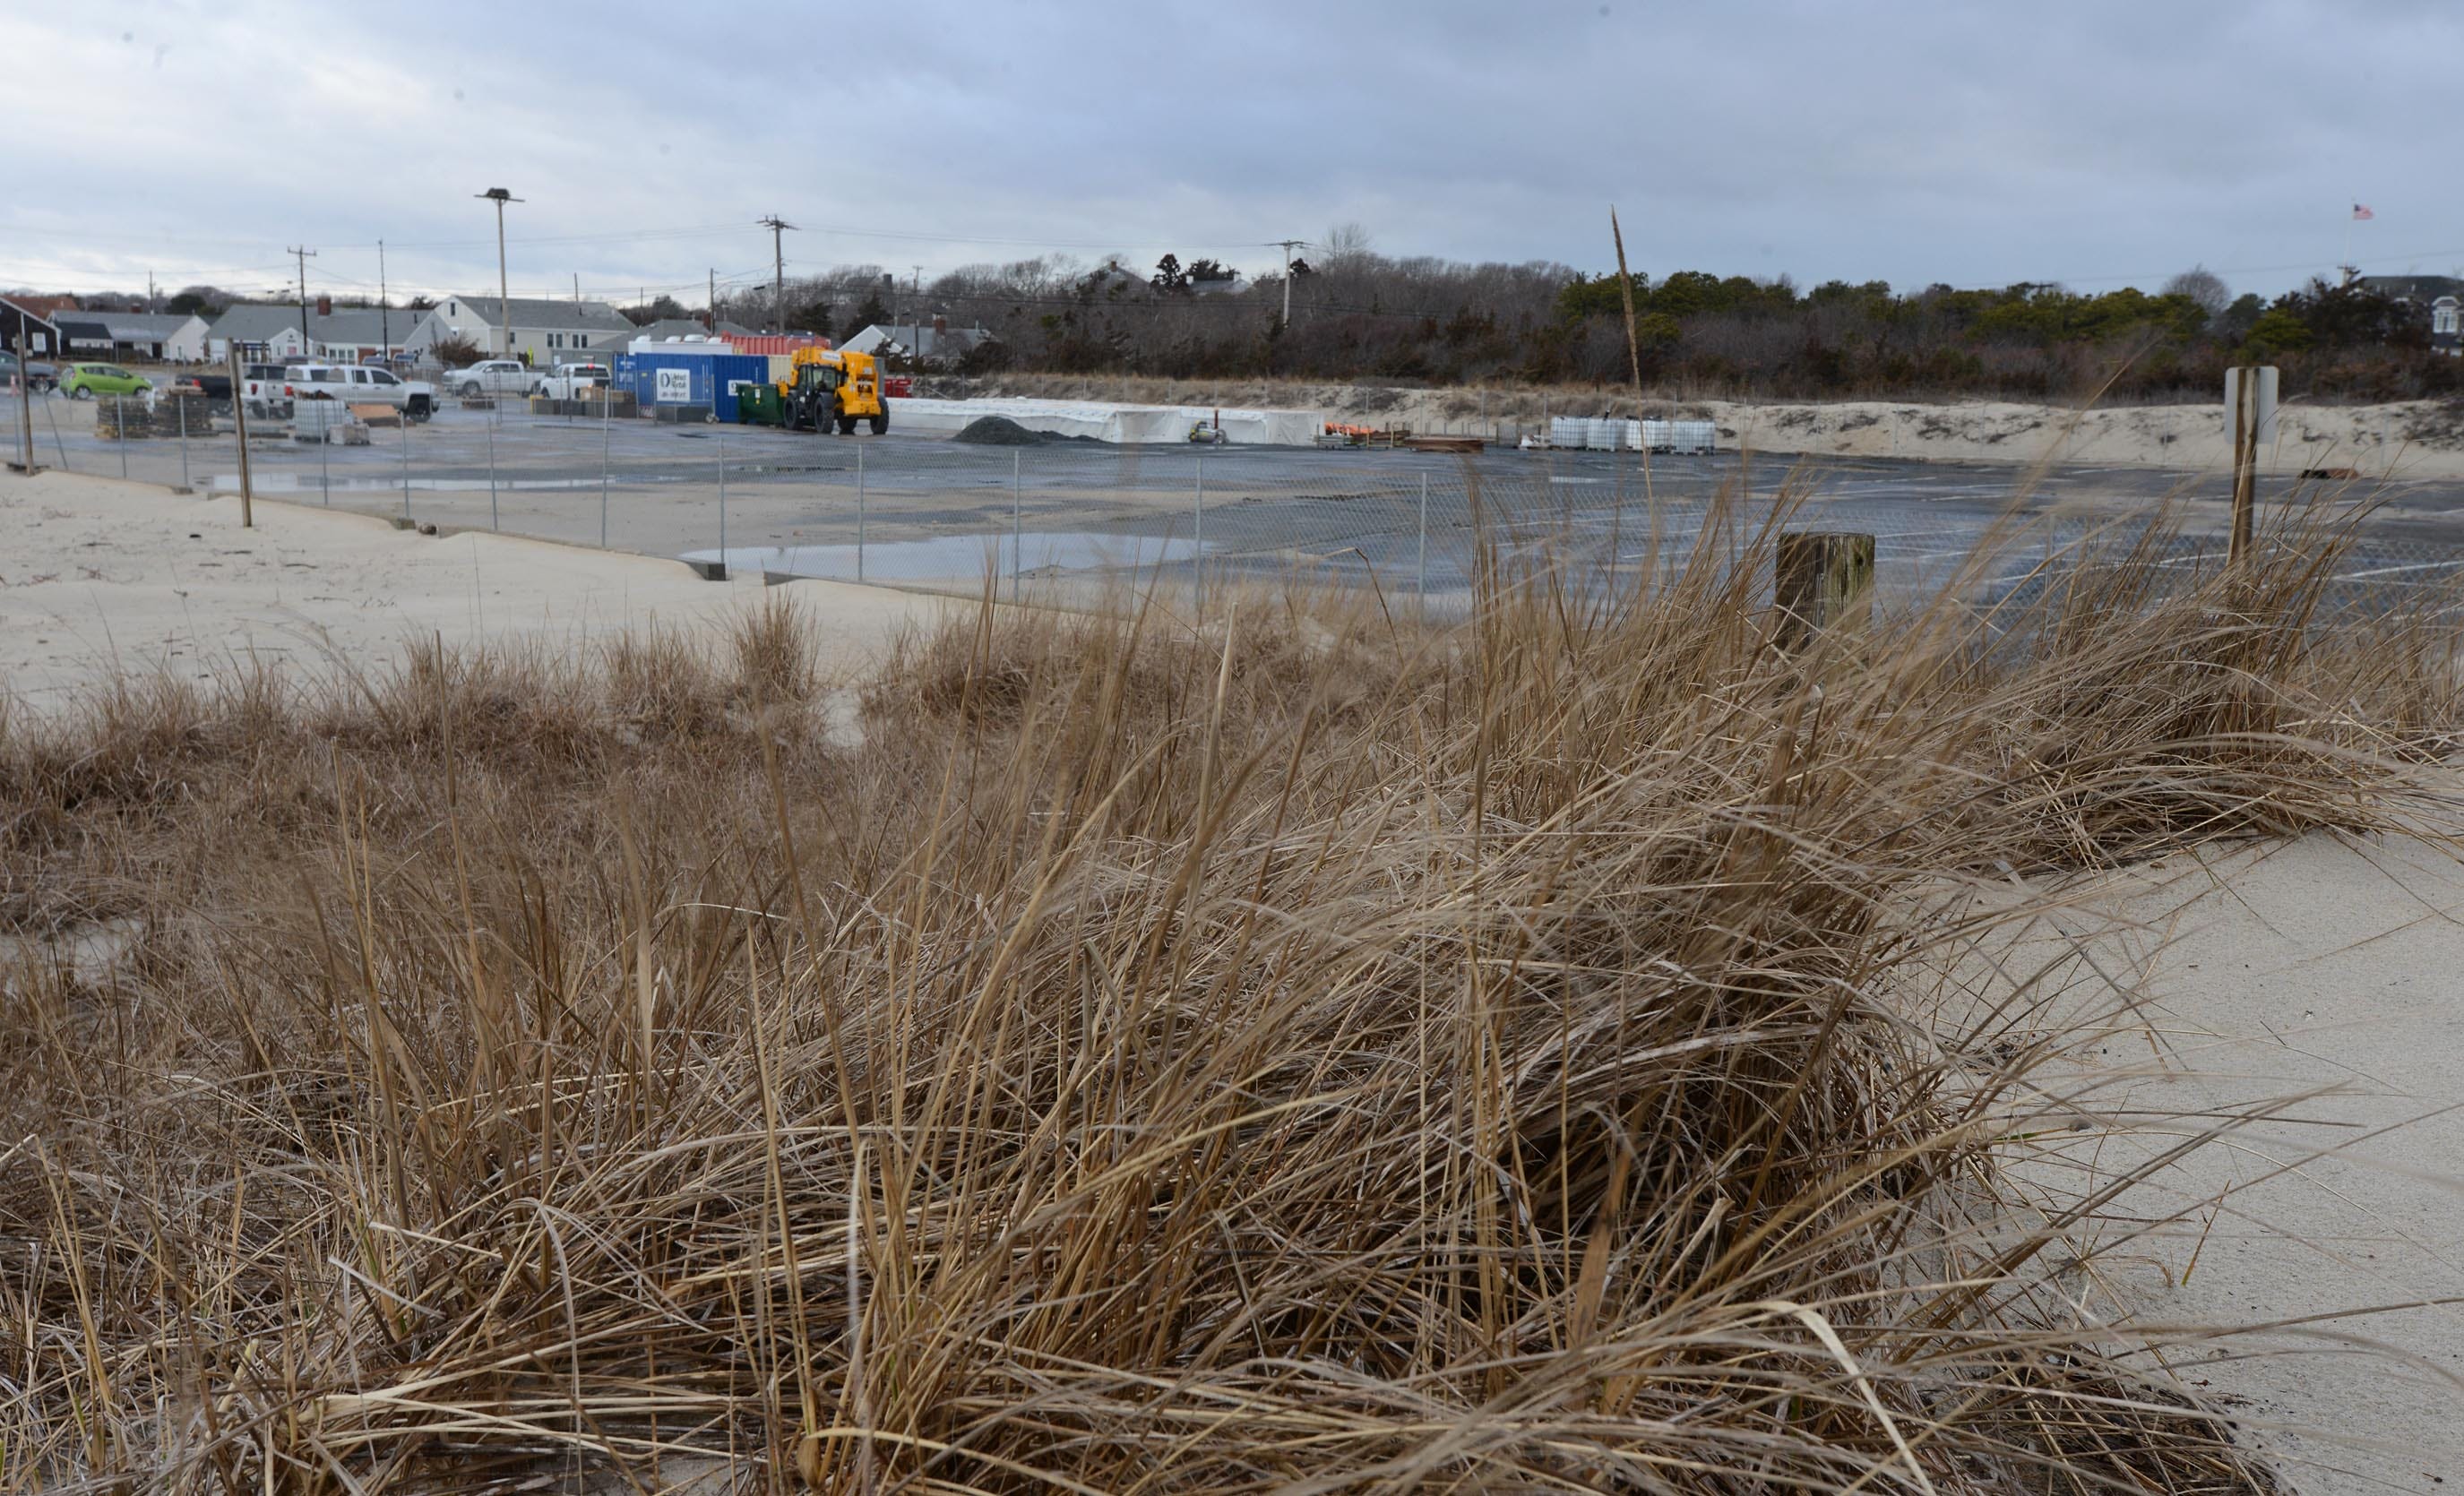 The parking lot at Covell Beach in Centerville, the cable landfall spot for a Vineyard Wind offshore wind project, was emptying out Wednesday as crews prepared to resurface the lot for the upcoming beach season.